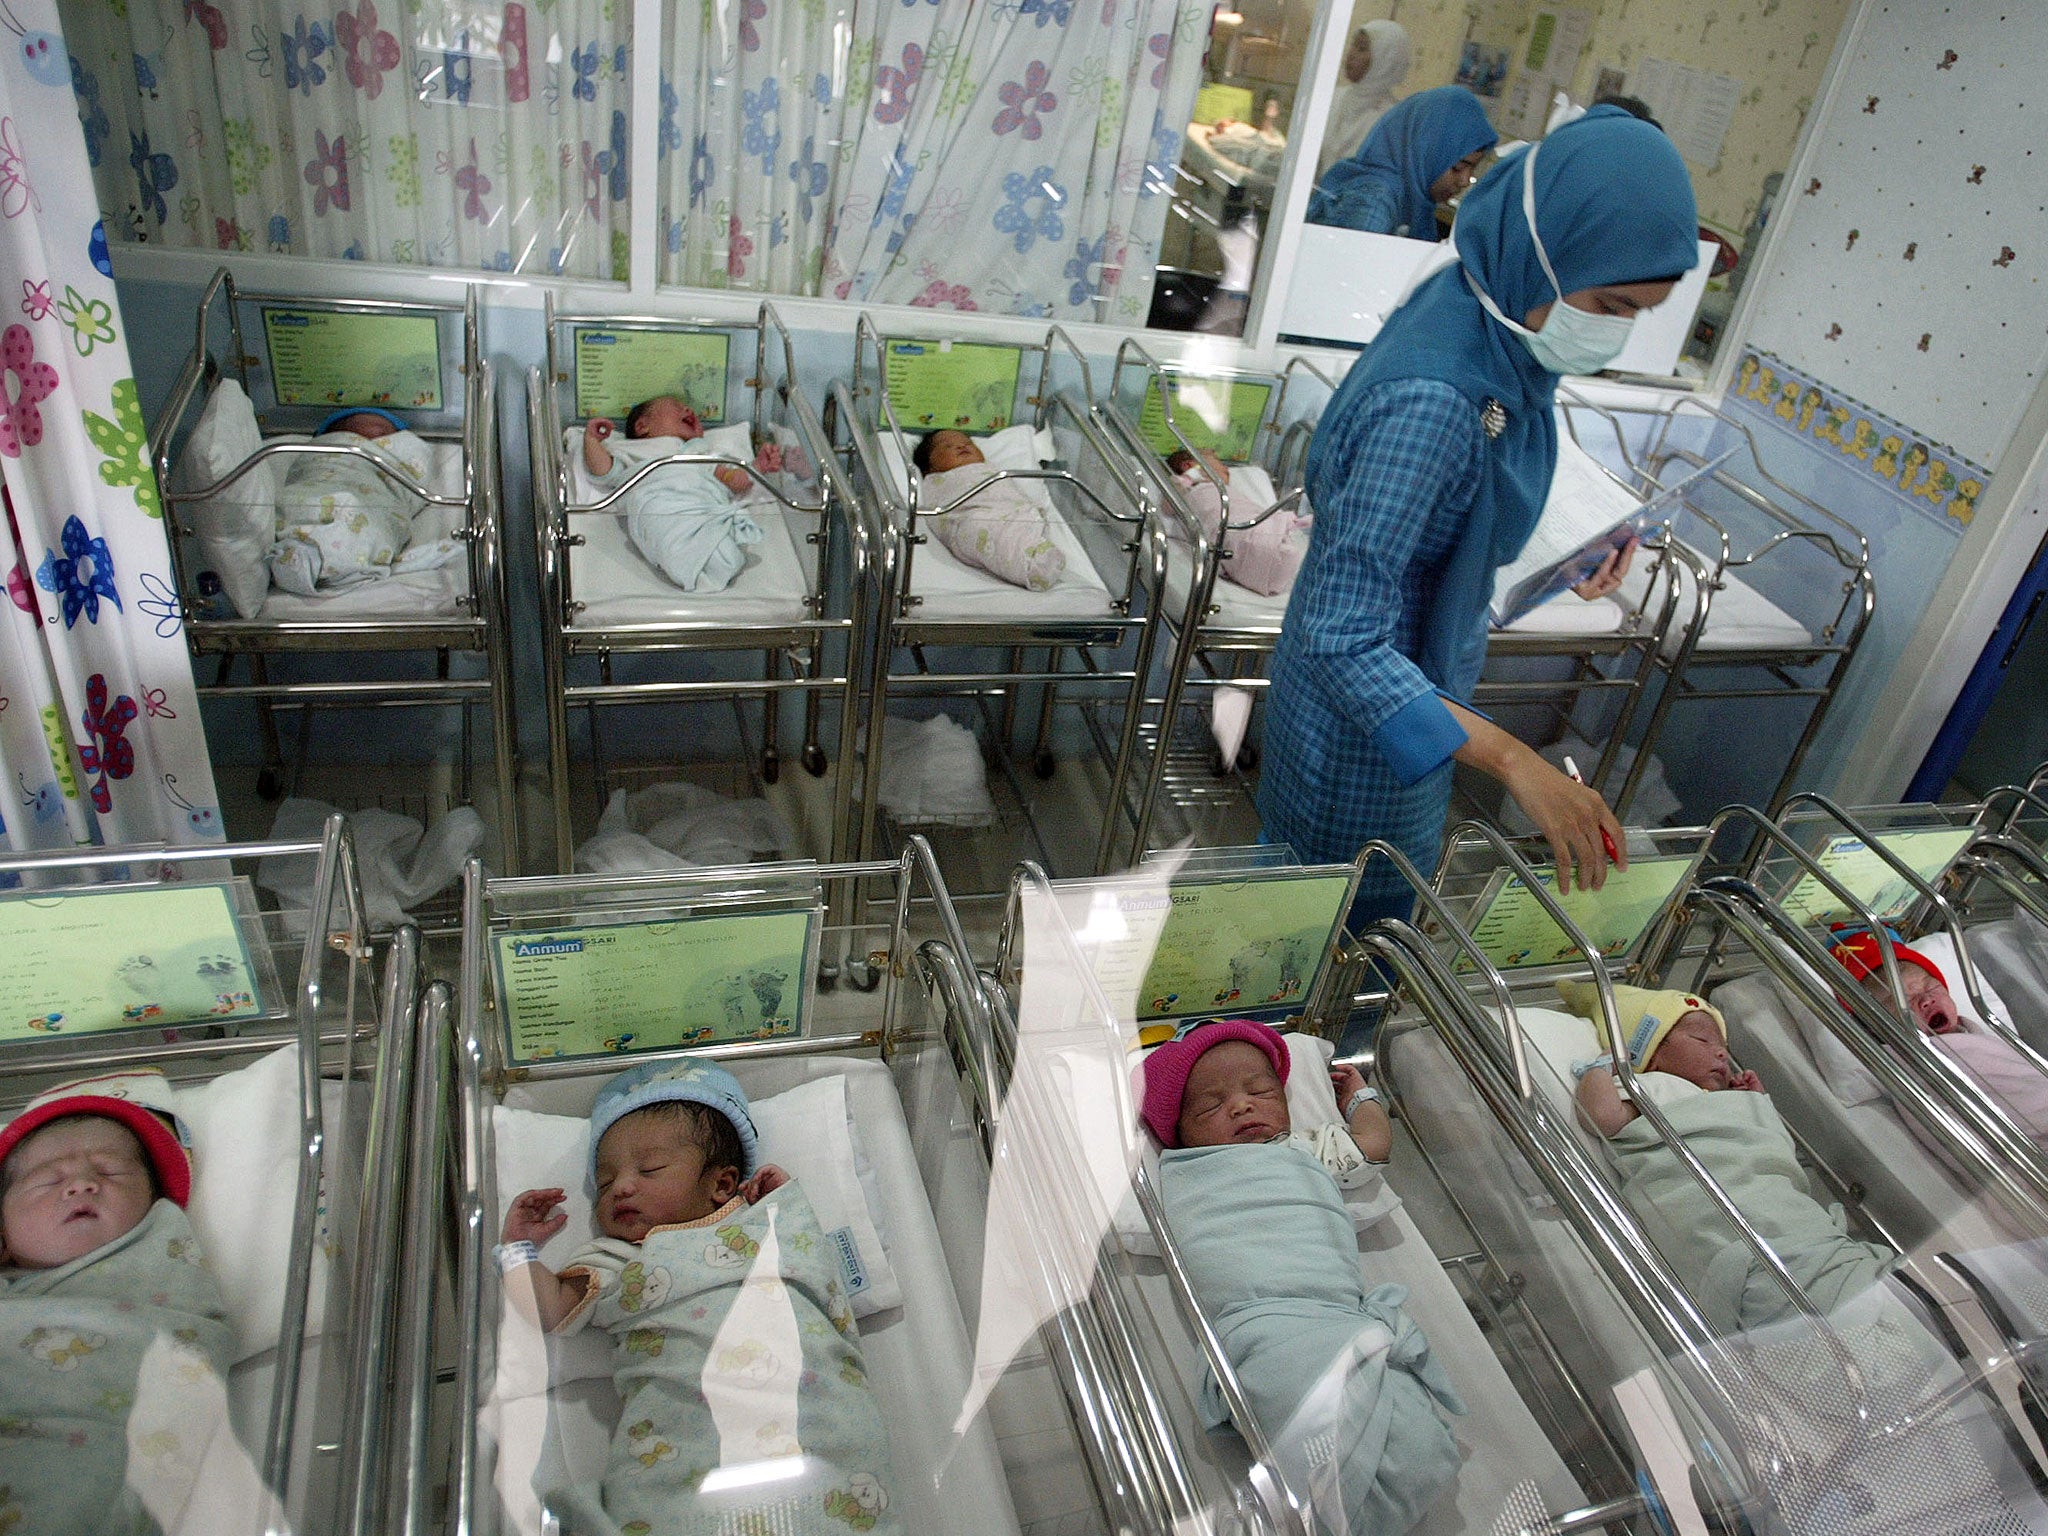 A nurse at the Mother and Child Hospital in Surabaya in East Java province looks after 13 newborn babies born on December 12, 2012.